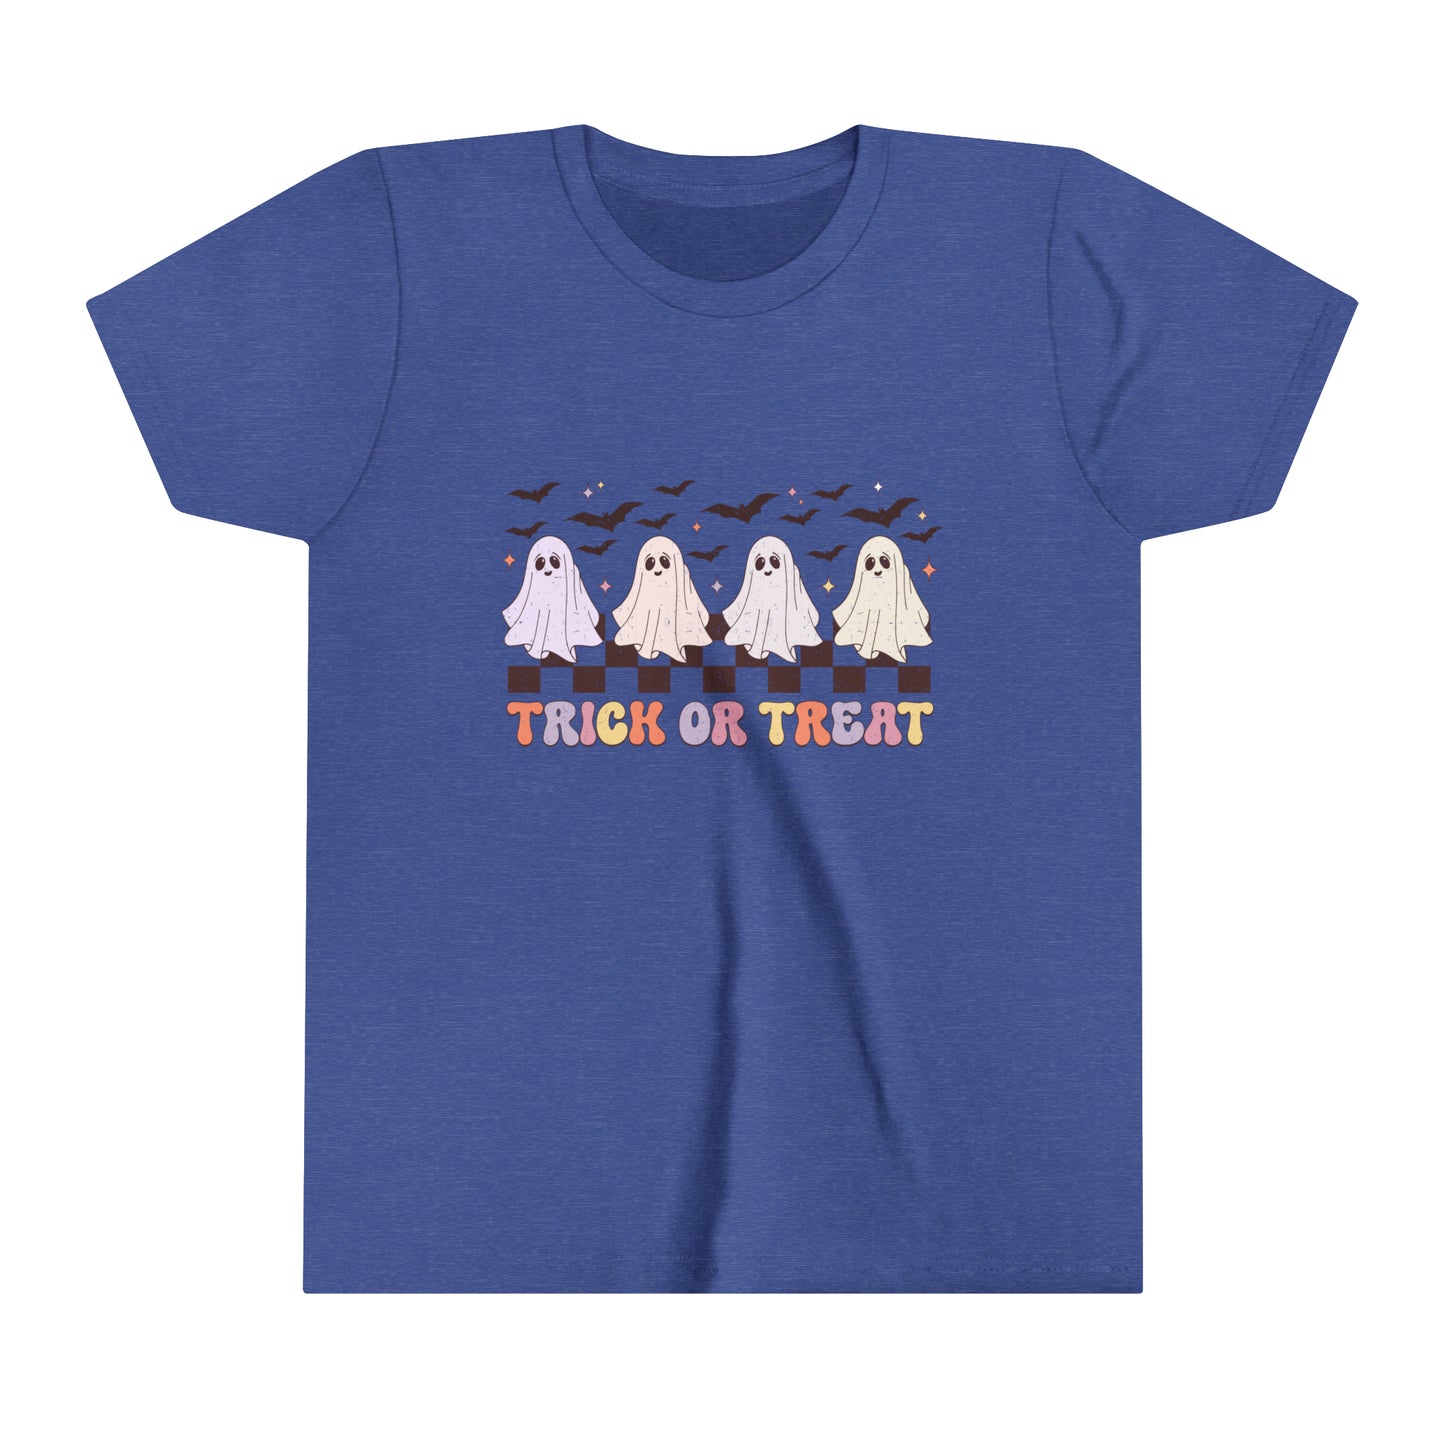 Trick or Treat Girl's Youth Short Sleeve Tee